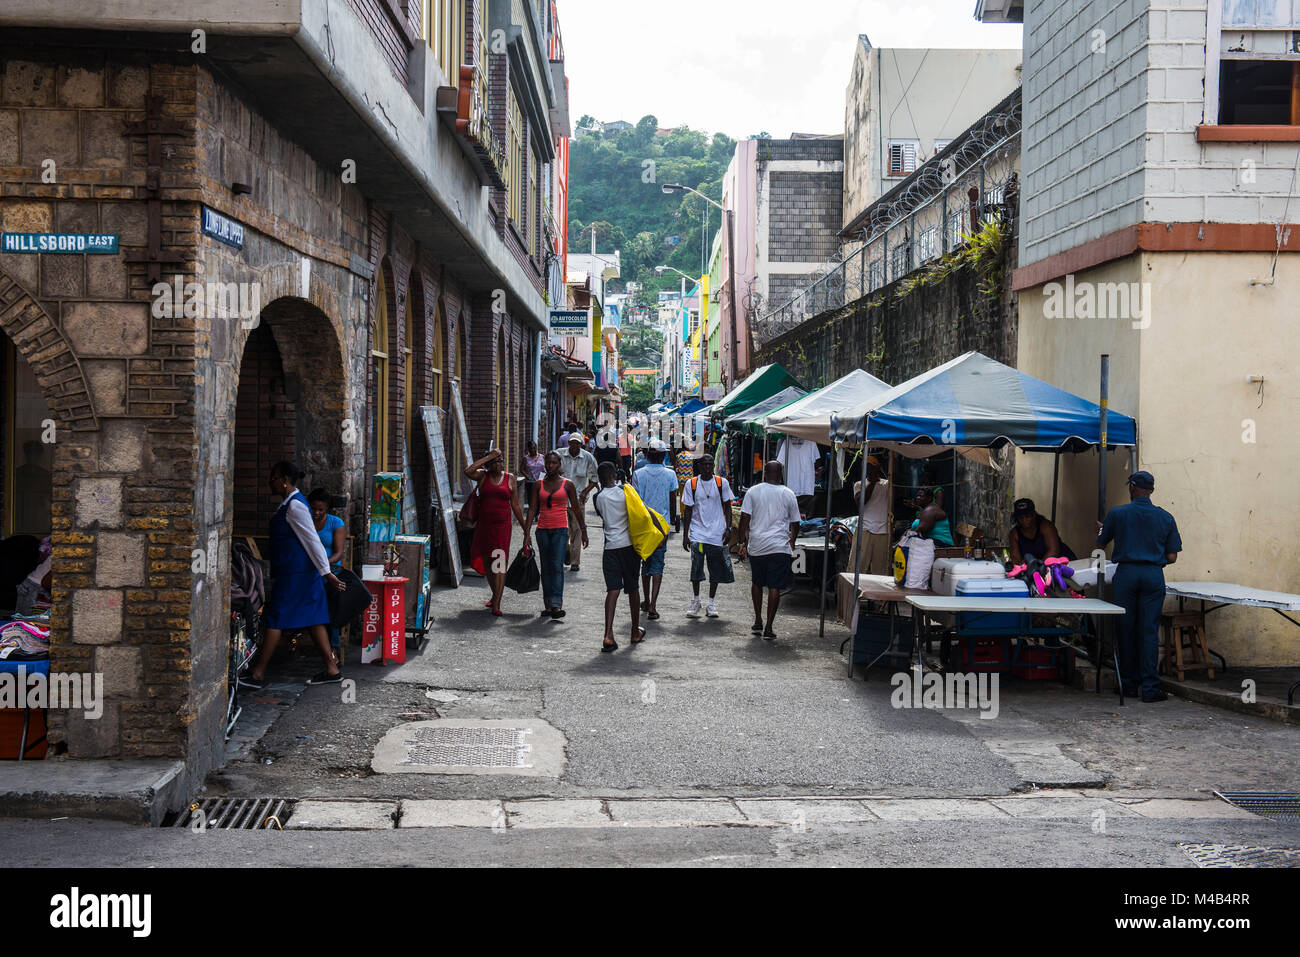 Market street in Kingstown,St.Vincent,St. Vincent and the Grenadines,Caribbean Stock Photo